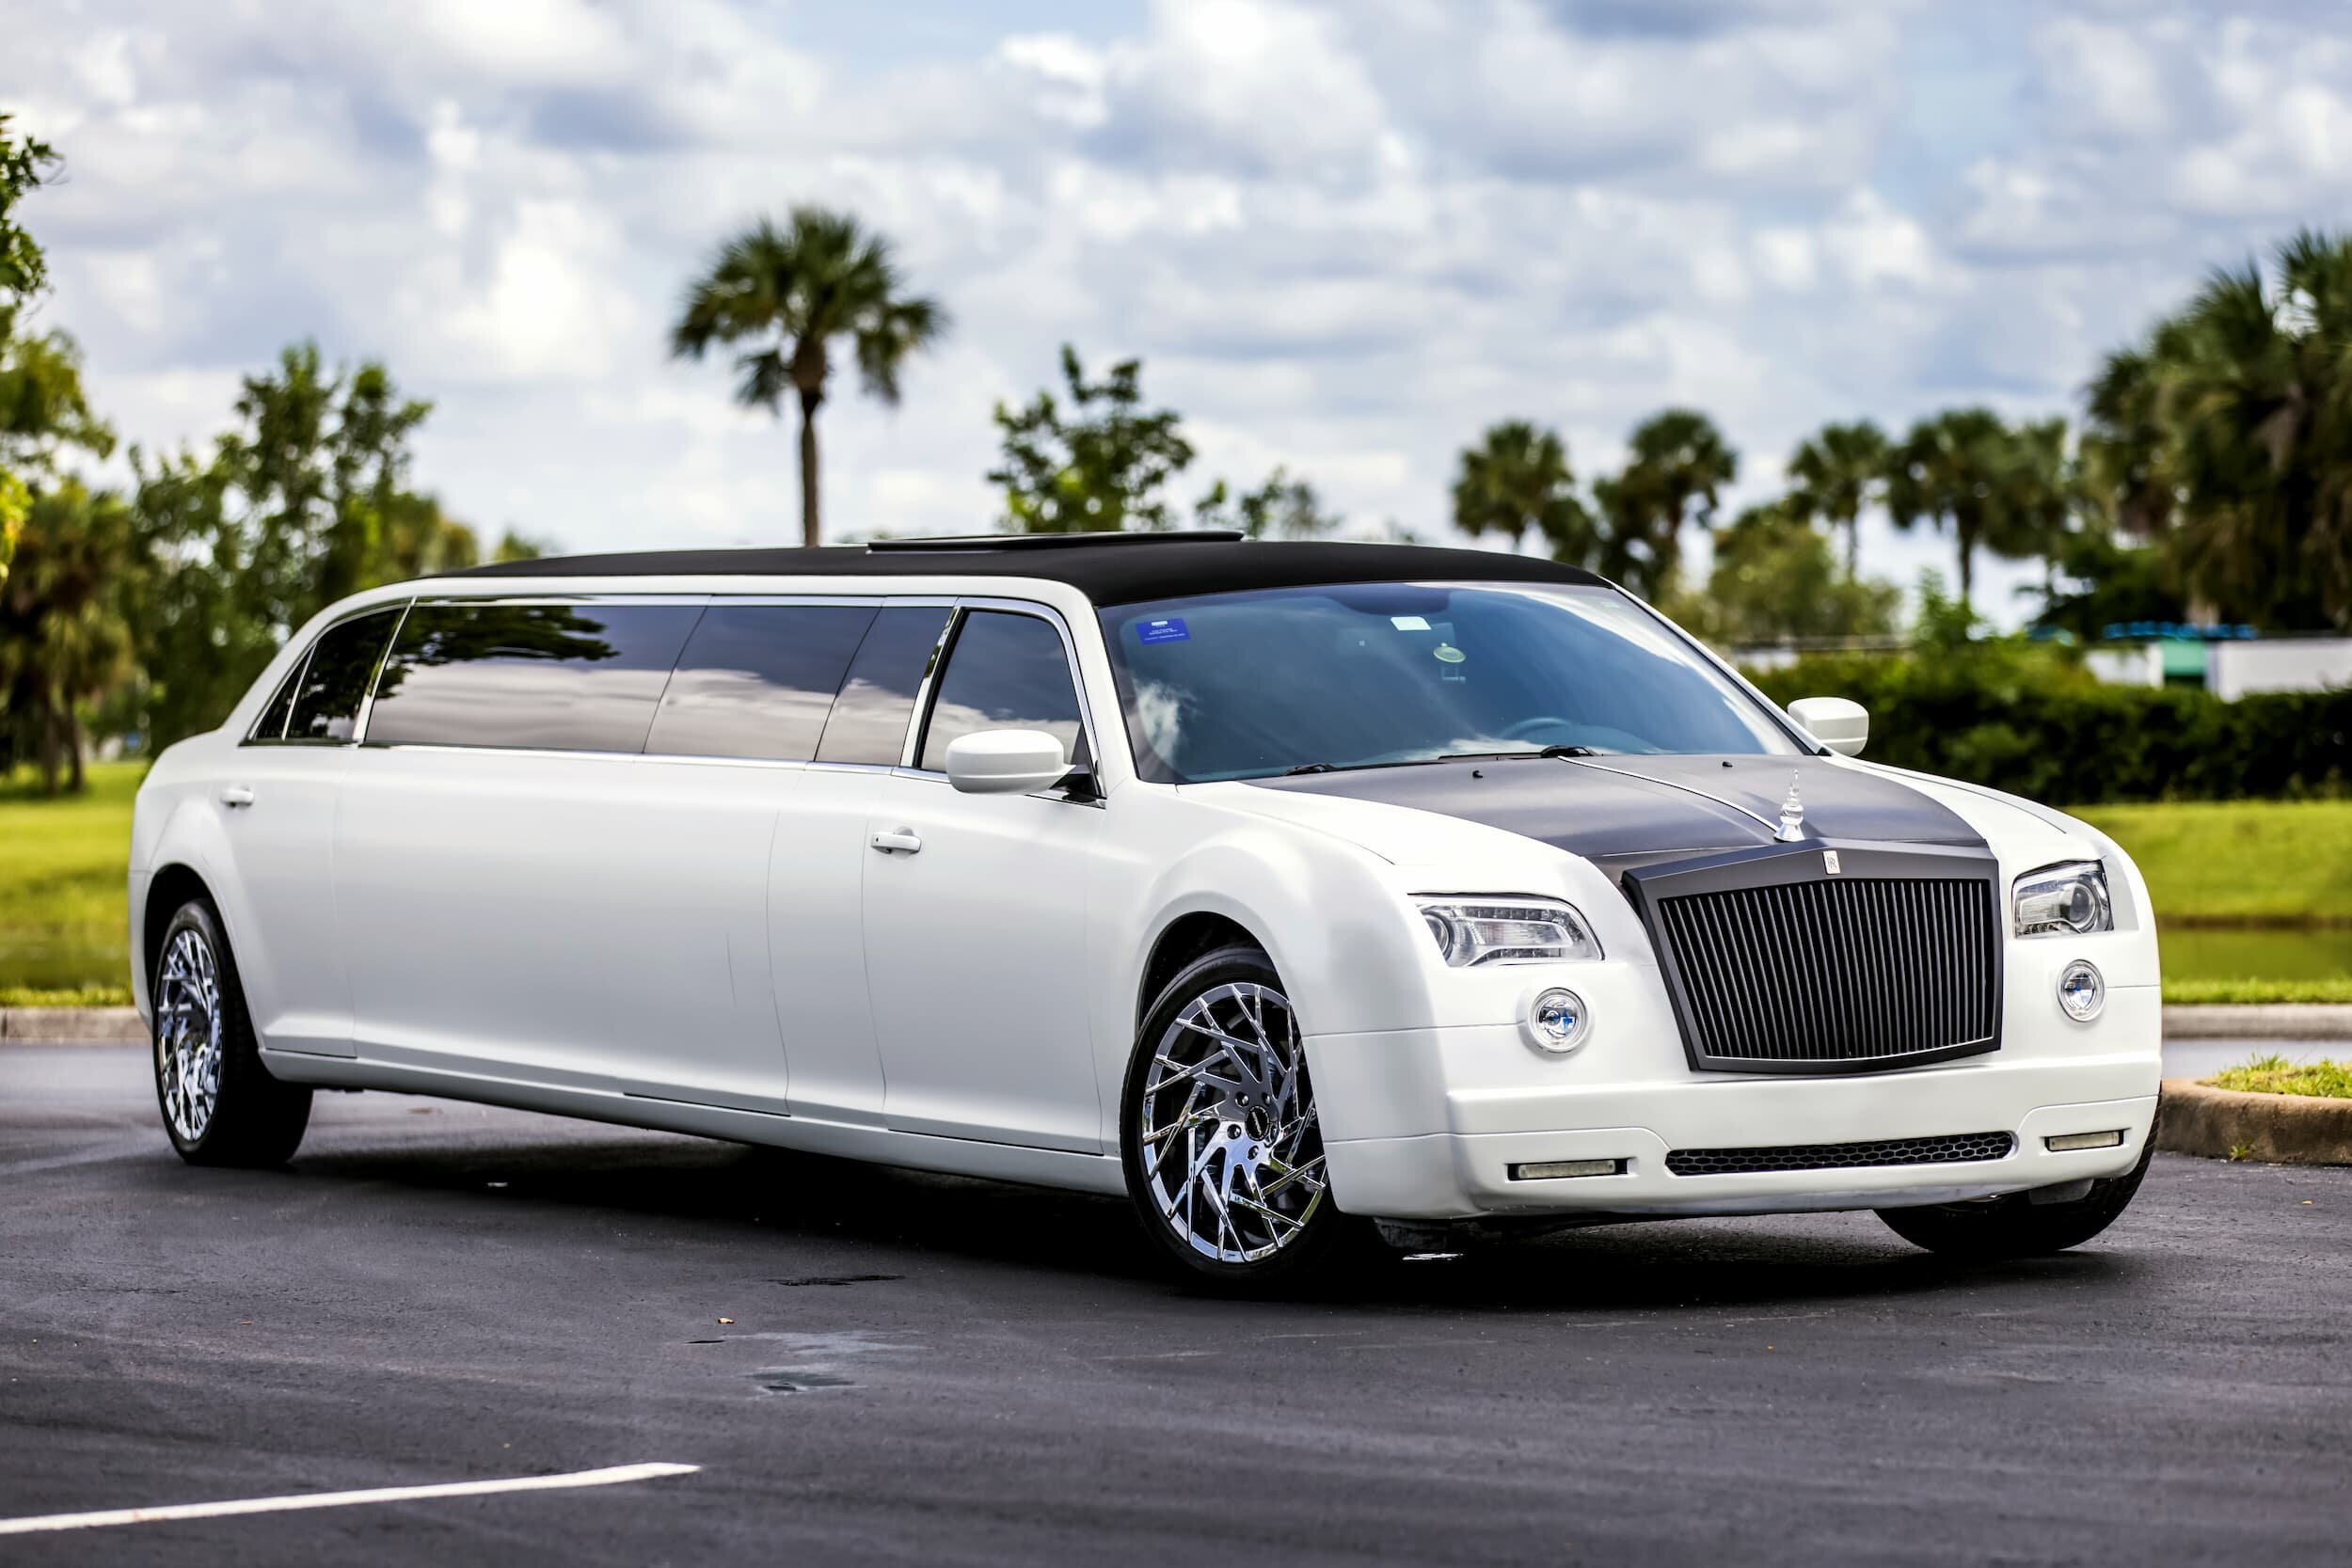 The Price of Luxury: How Much Does It Cost to Rent a Limo?